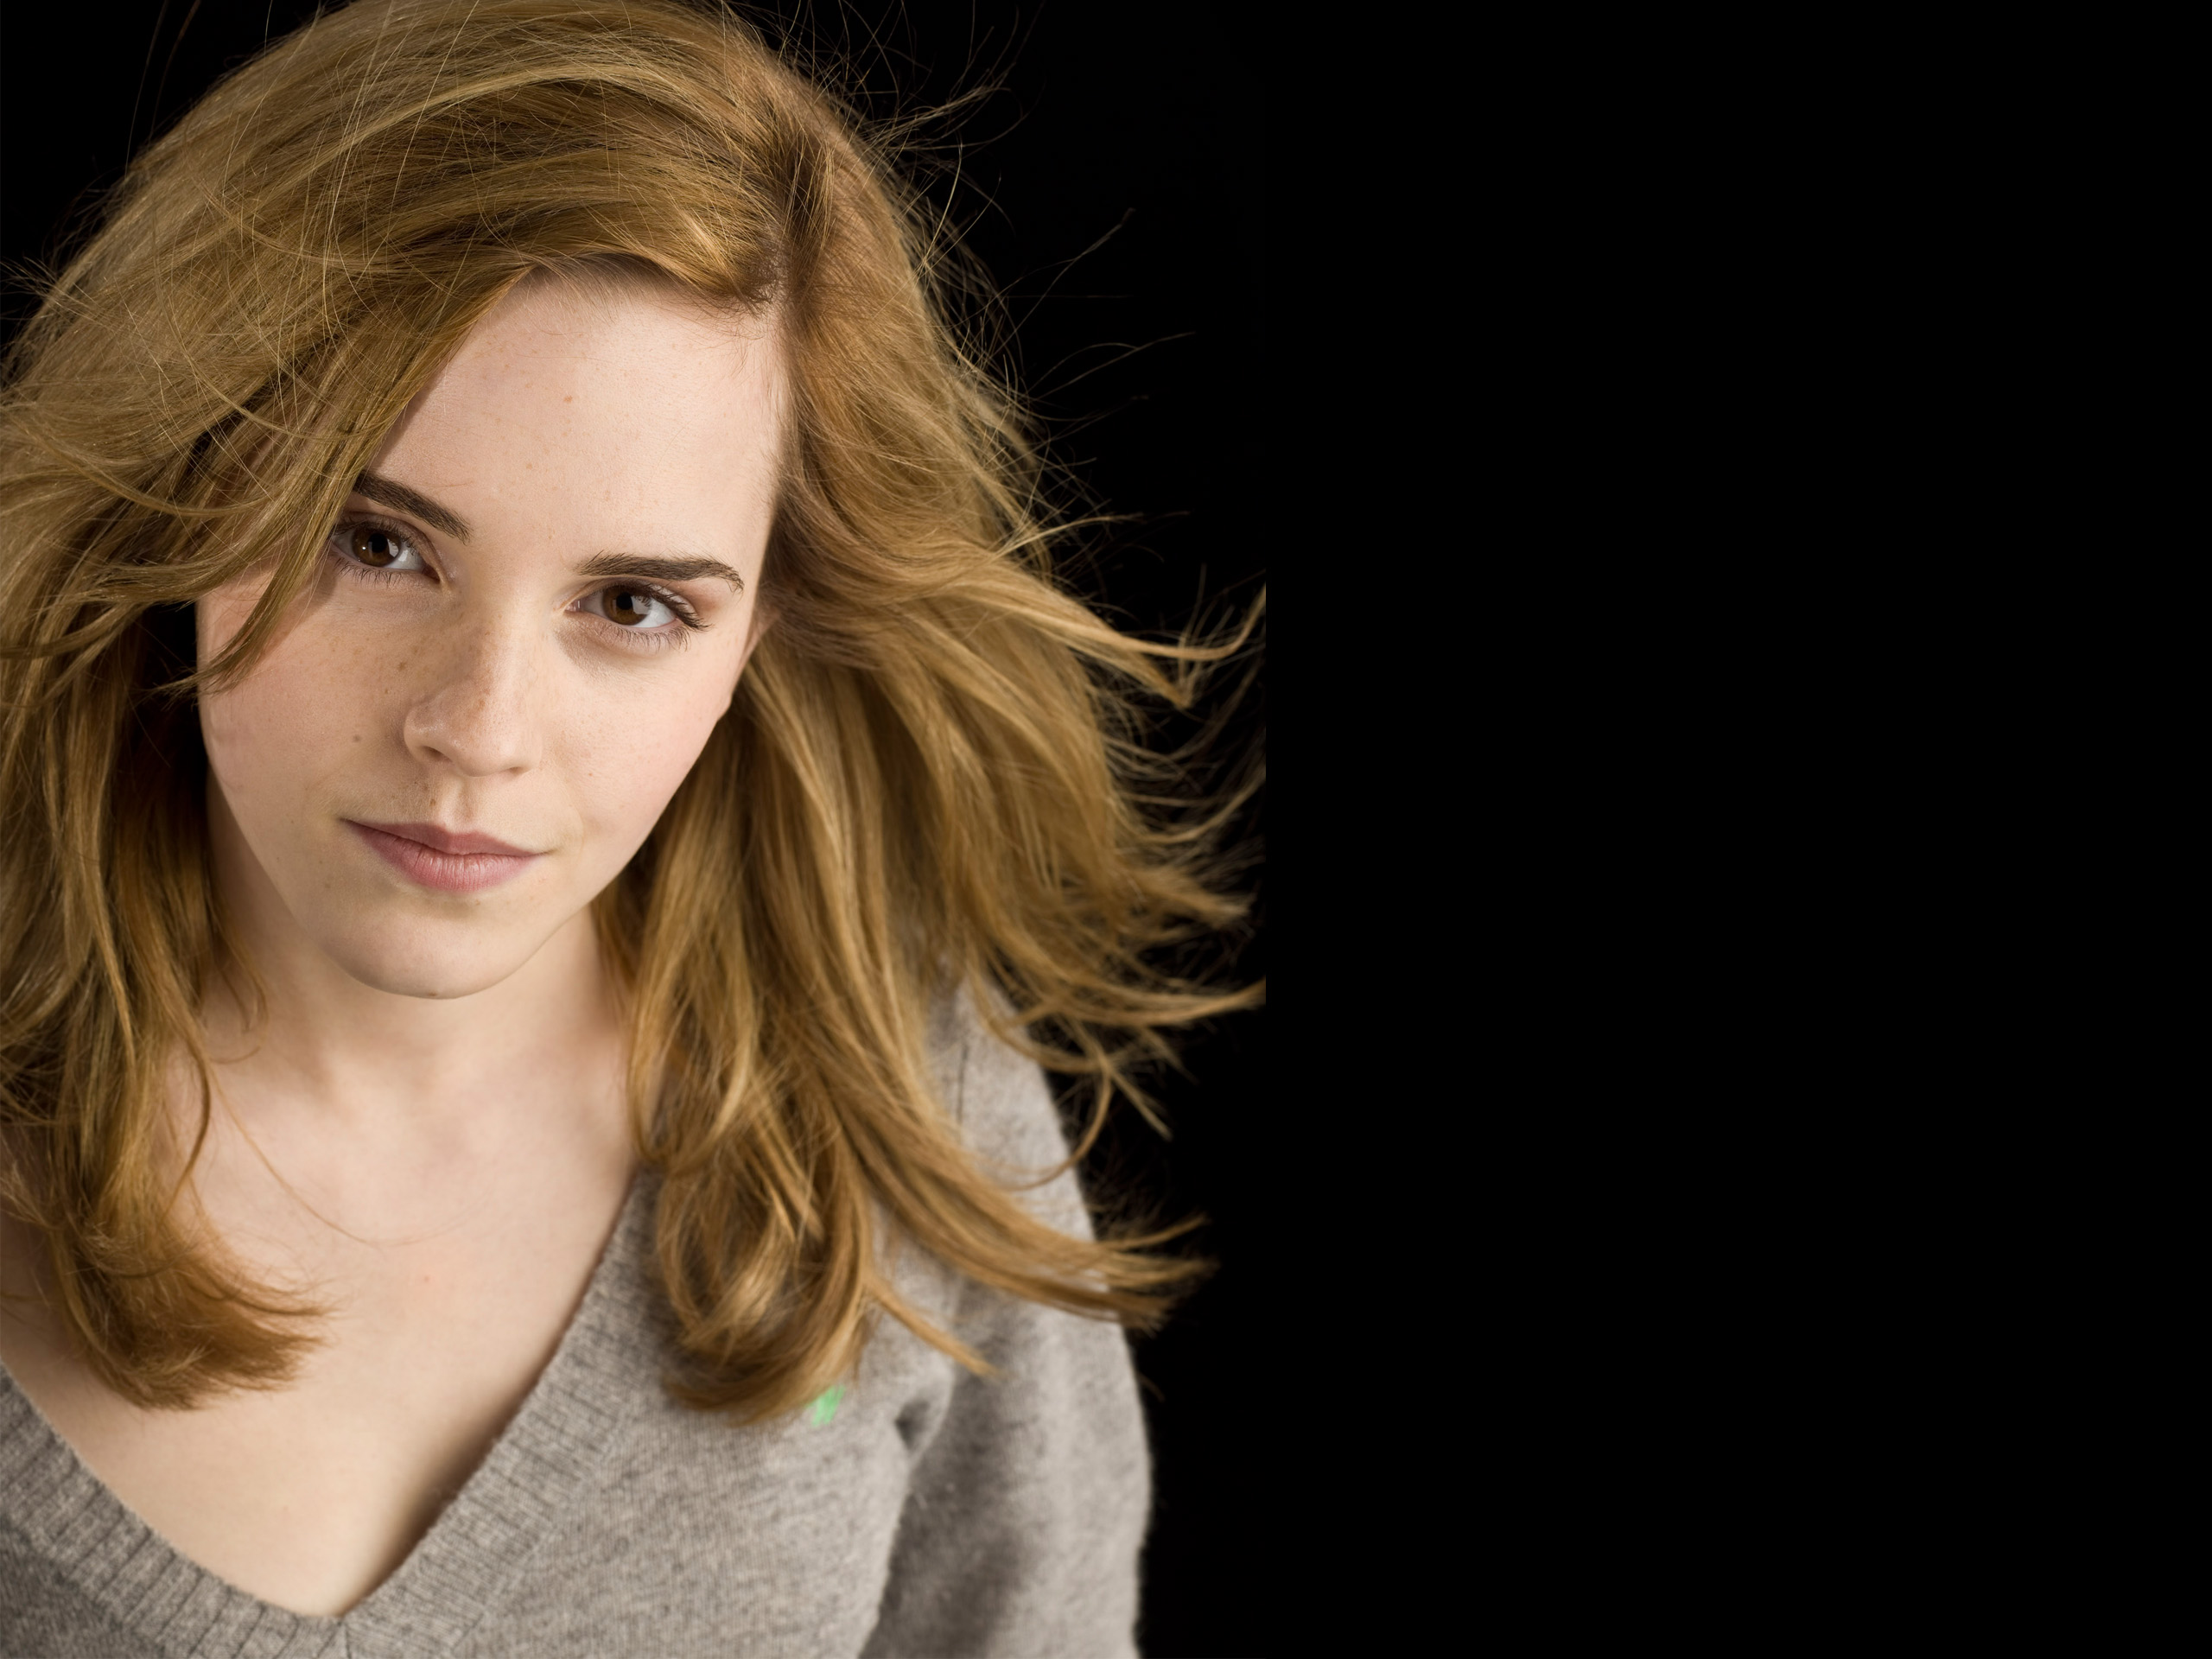 Free Download Emma Watson High Quality Hd 2 Wallpapers Hd Wallpapers [1600x1200] For Your